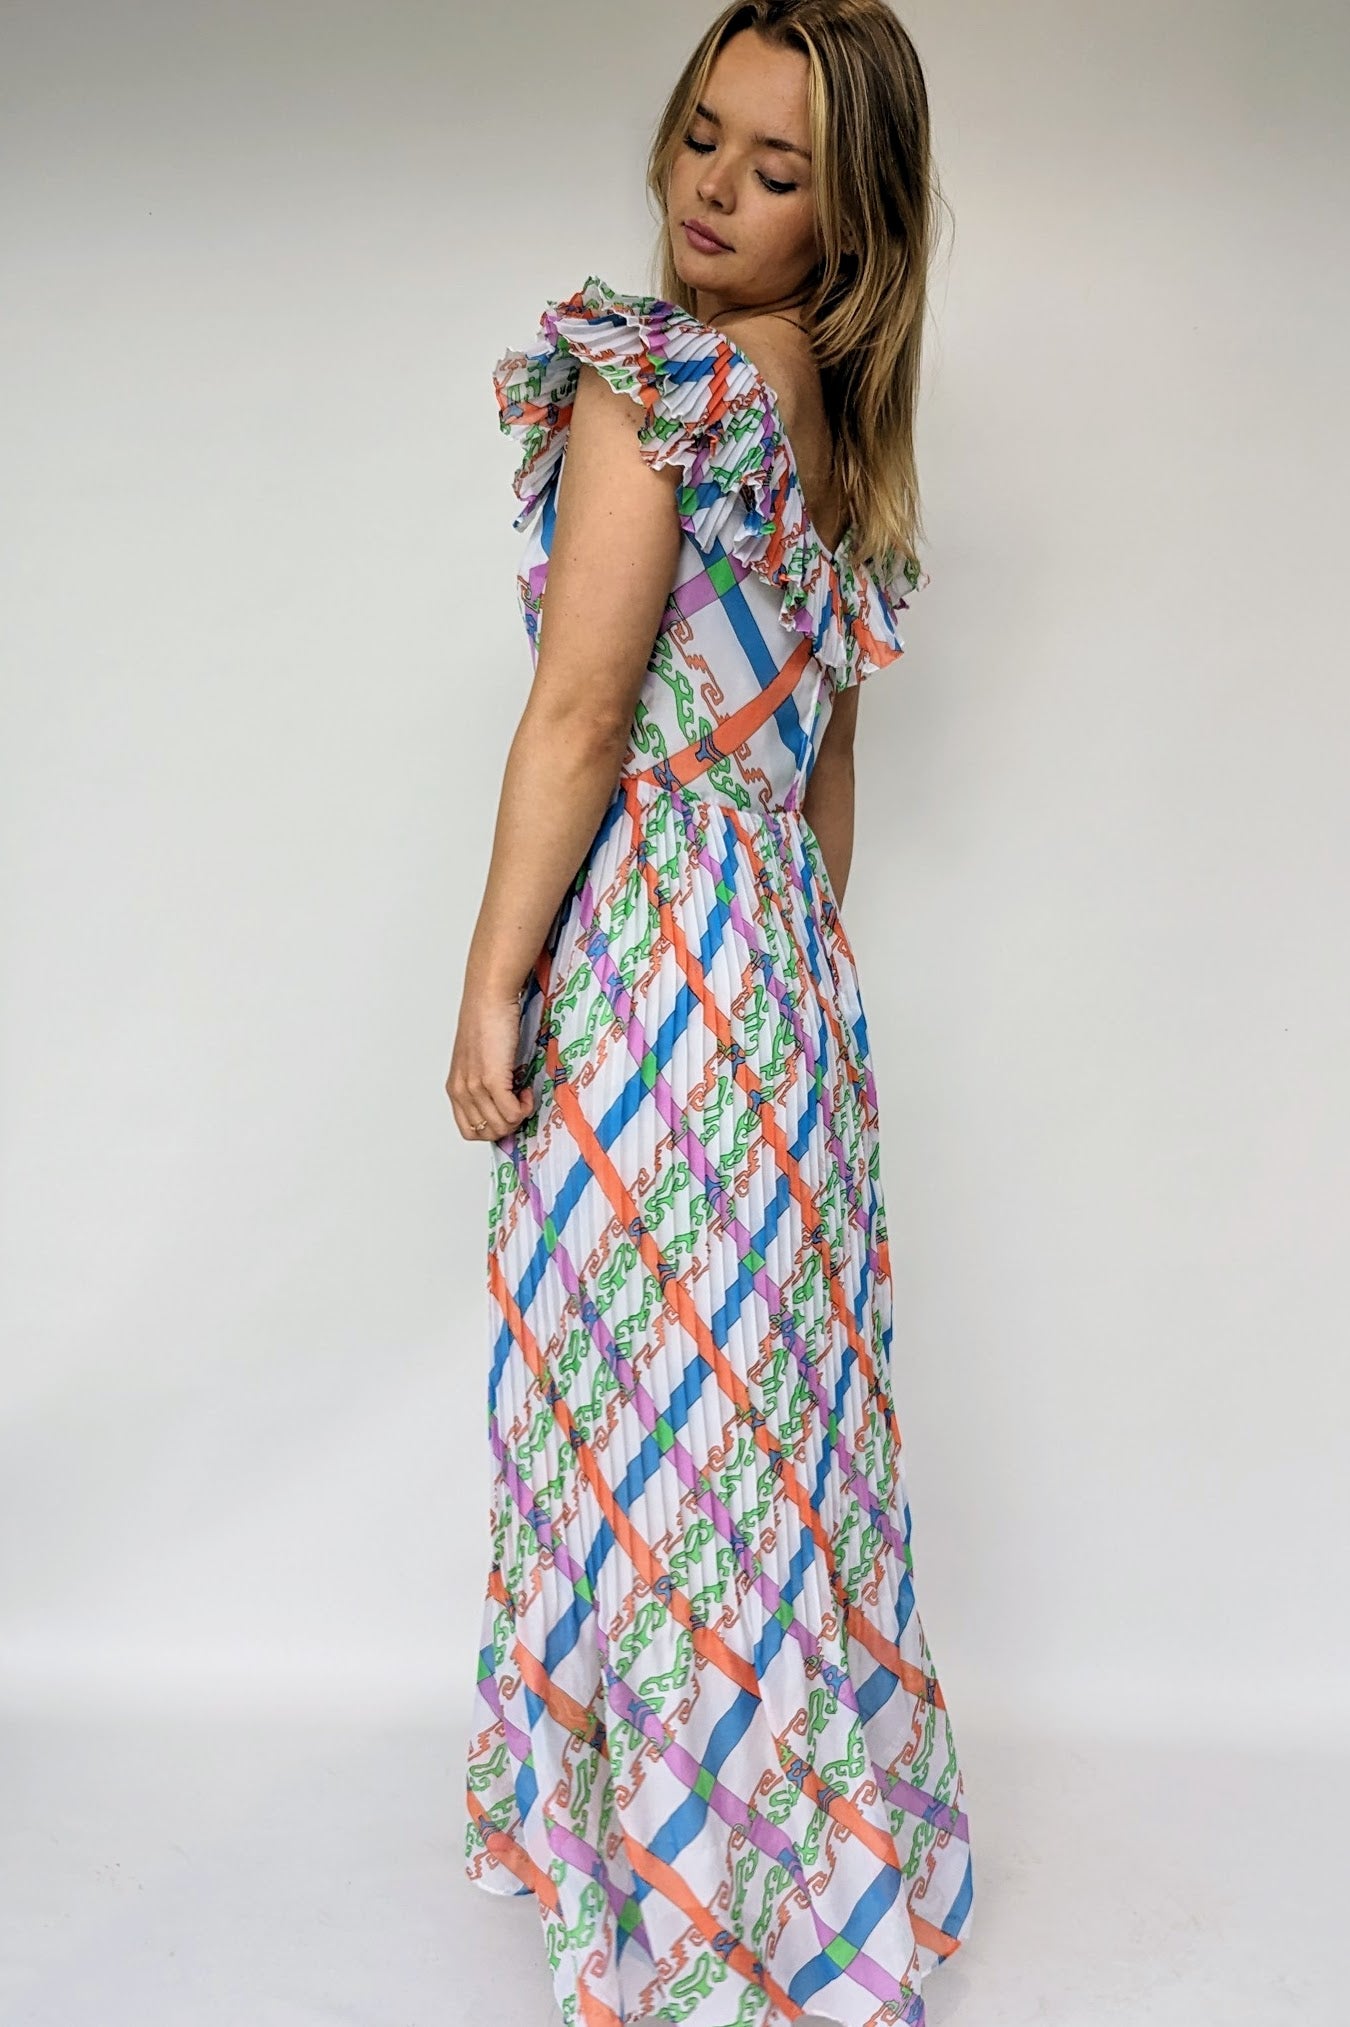 frilled neckline and side view of vintage 1970s maxi dress with bold pattern of orange, green, blue and purple